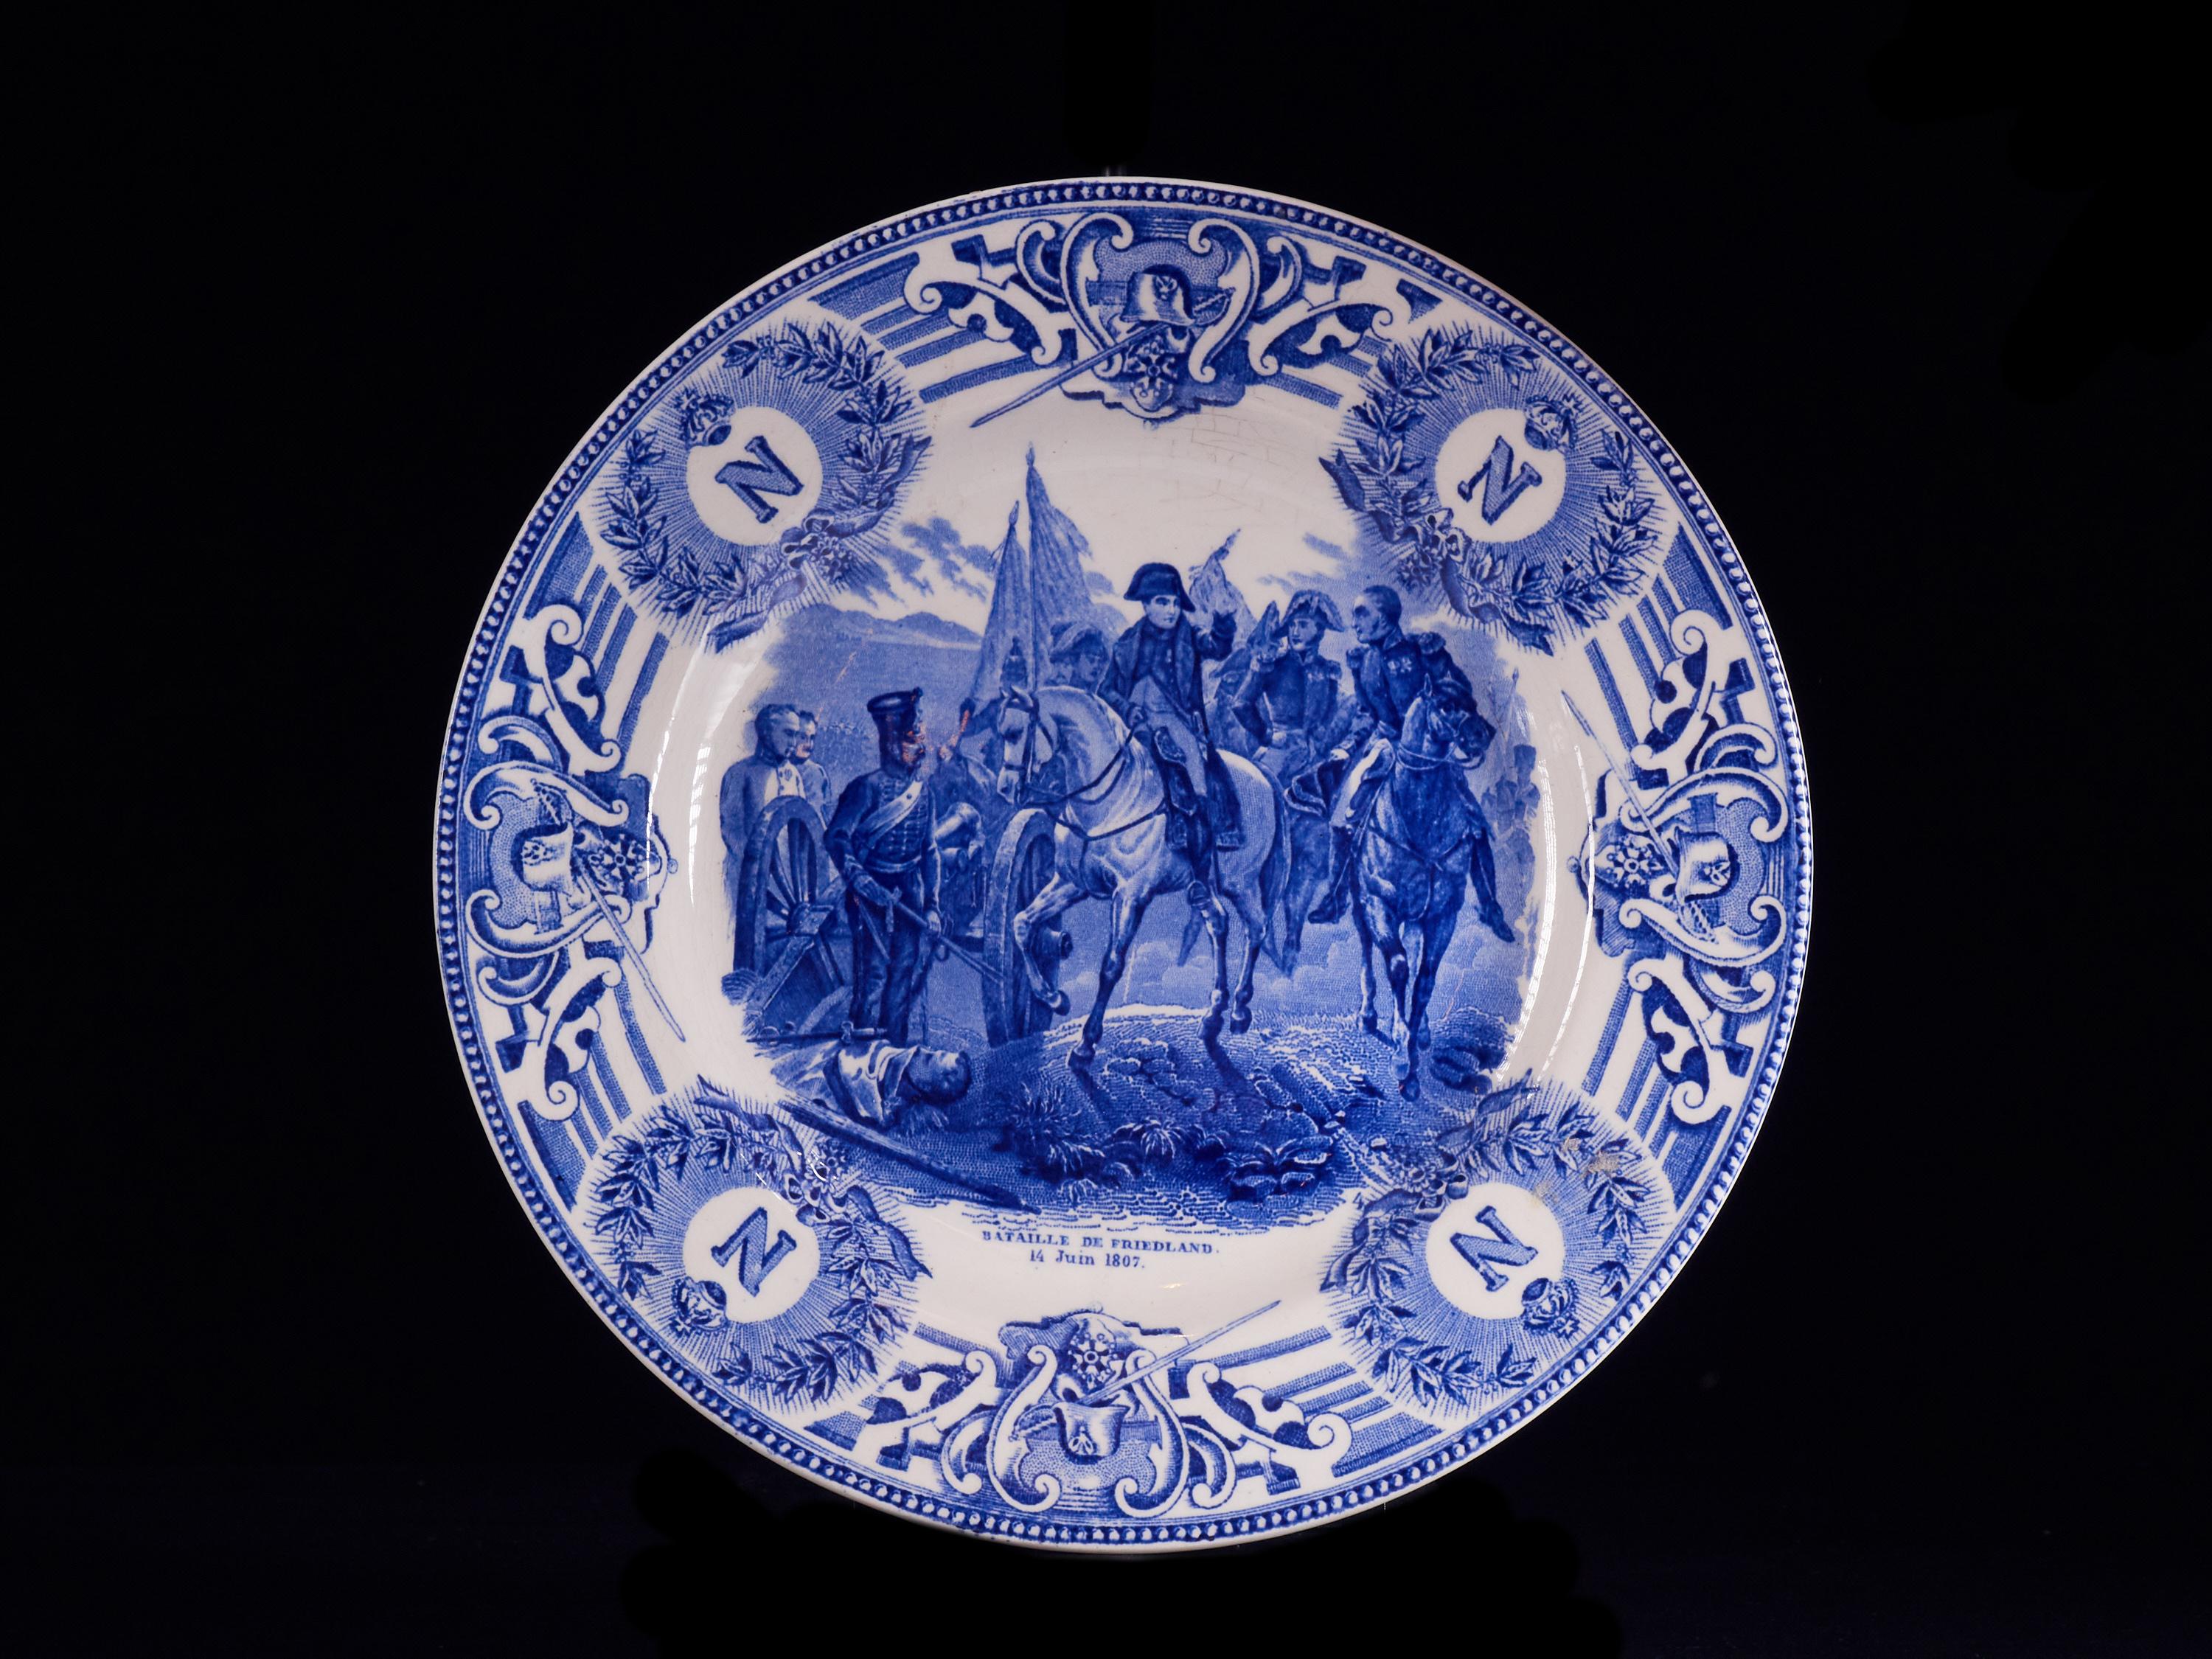 Wonderful set of 4 white faïencerie plates from the 1920s-1930s depicting major French battle scenes of the late 18th and early 19th century. The items are superbly painted with stamped indigo blue designs based on a 